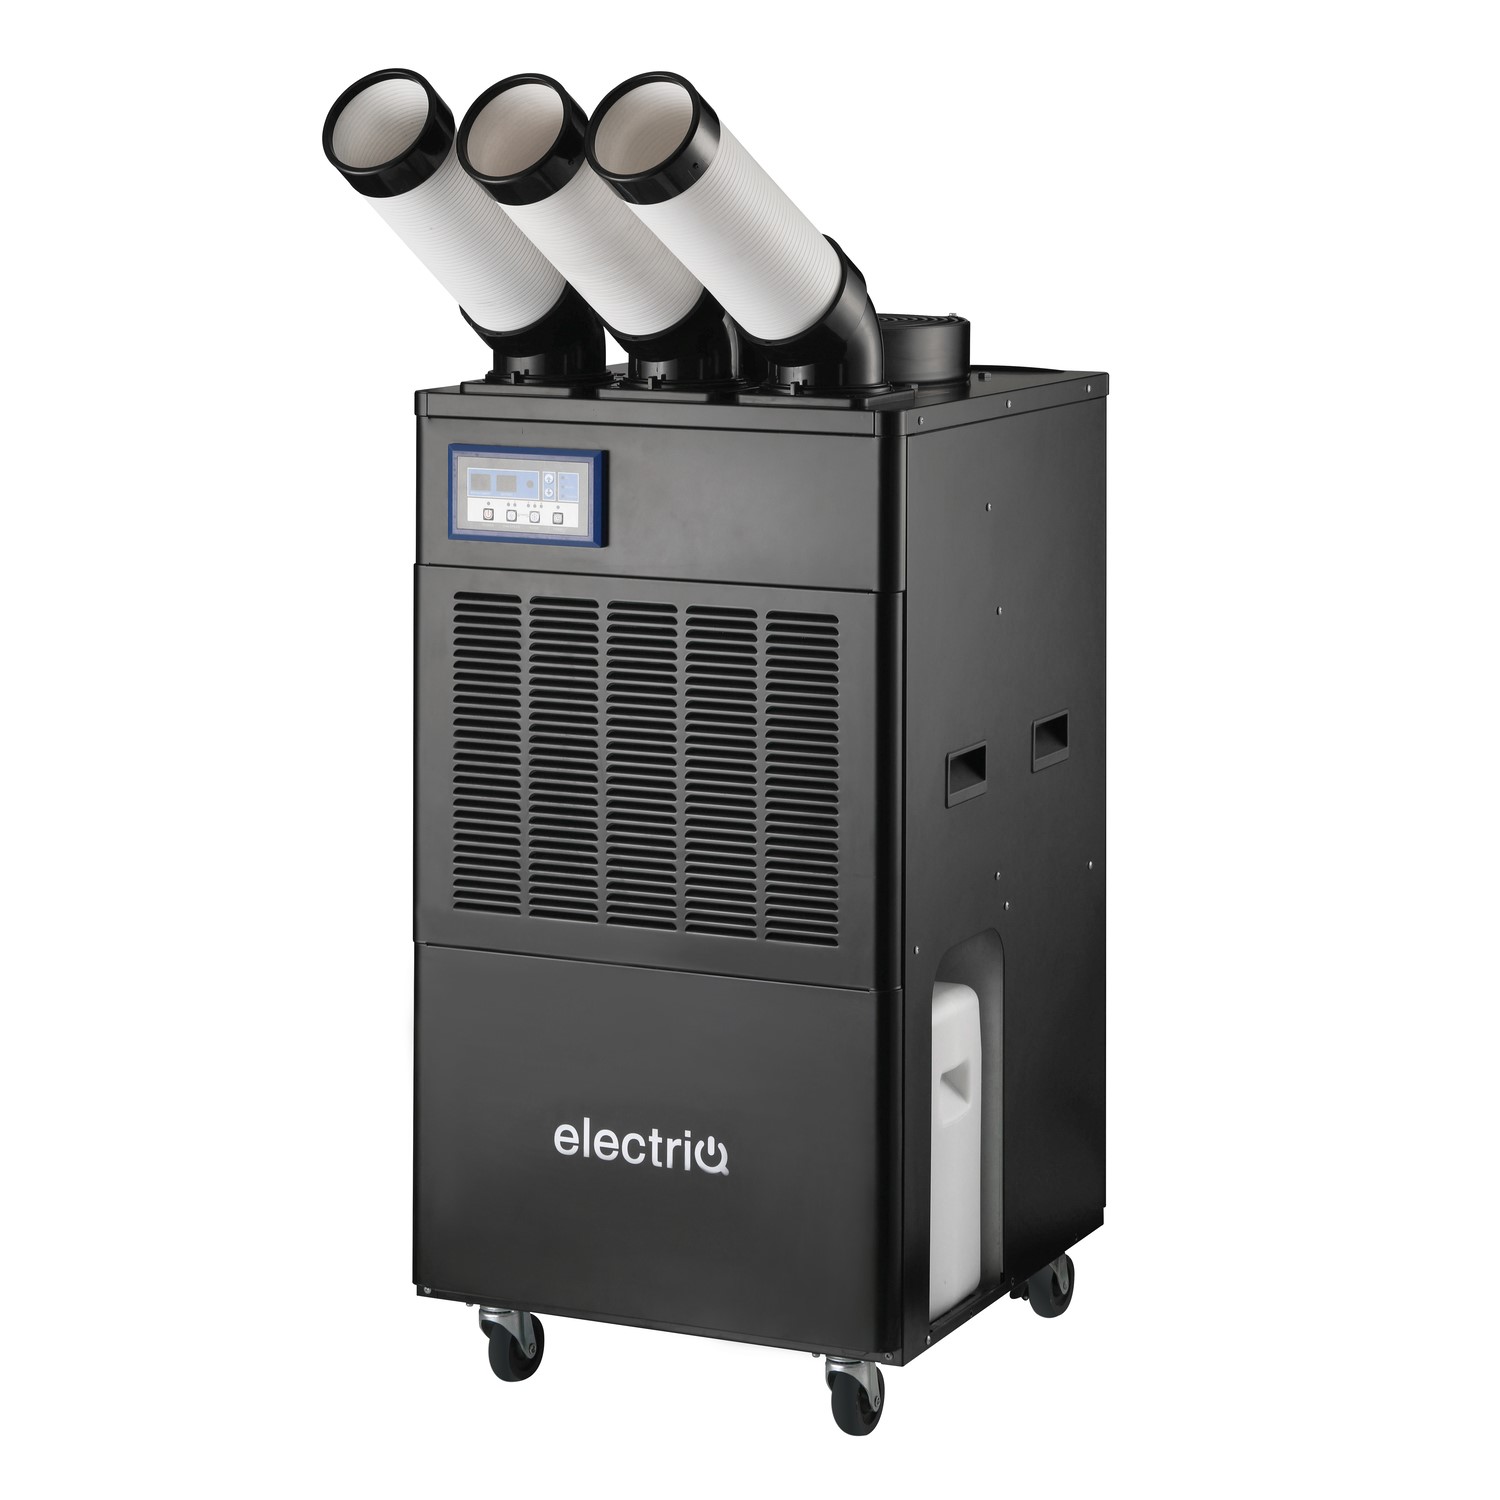 electriQ 18000 BTU Portable Commercial Air Conditioner for up to 45 sqm areas - Heavy Duty Metal Body